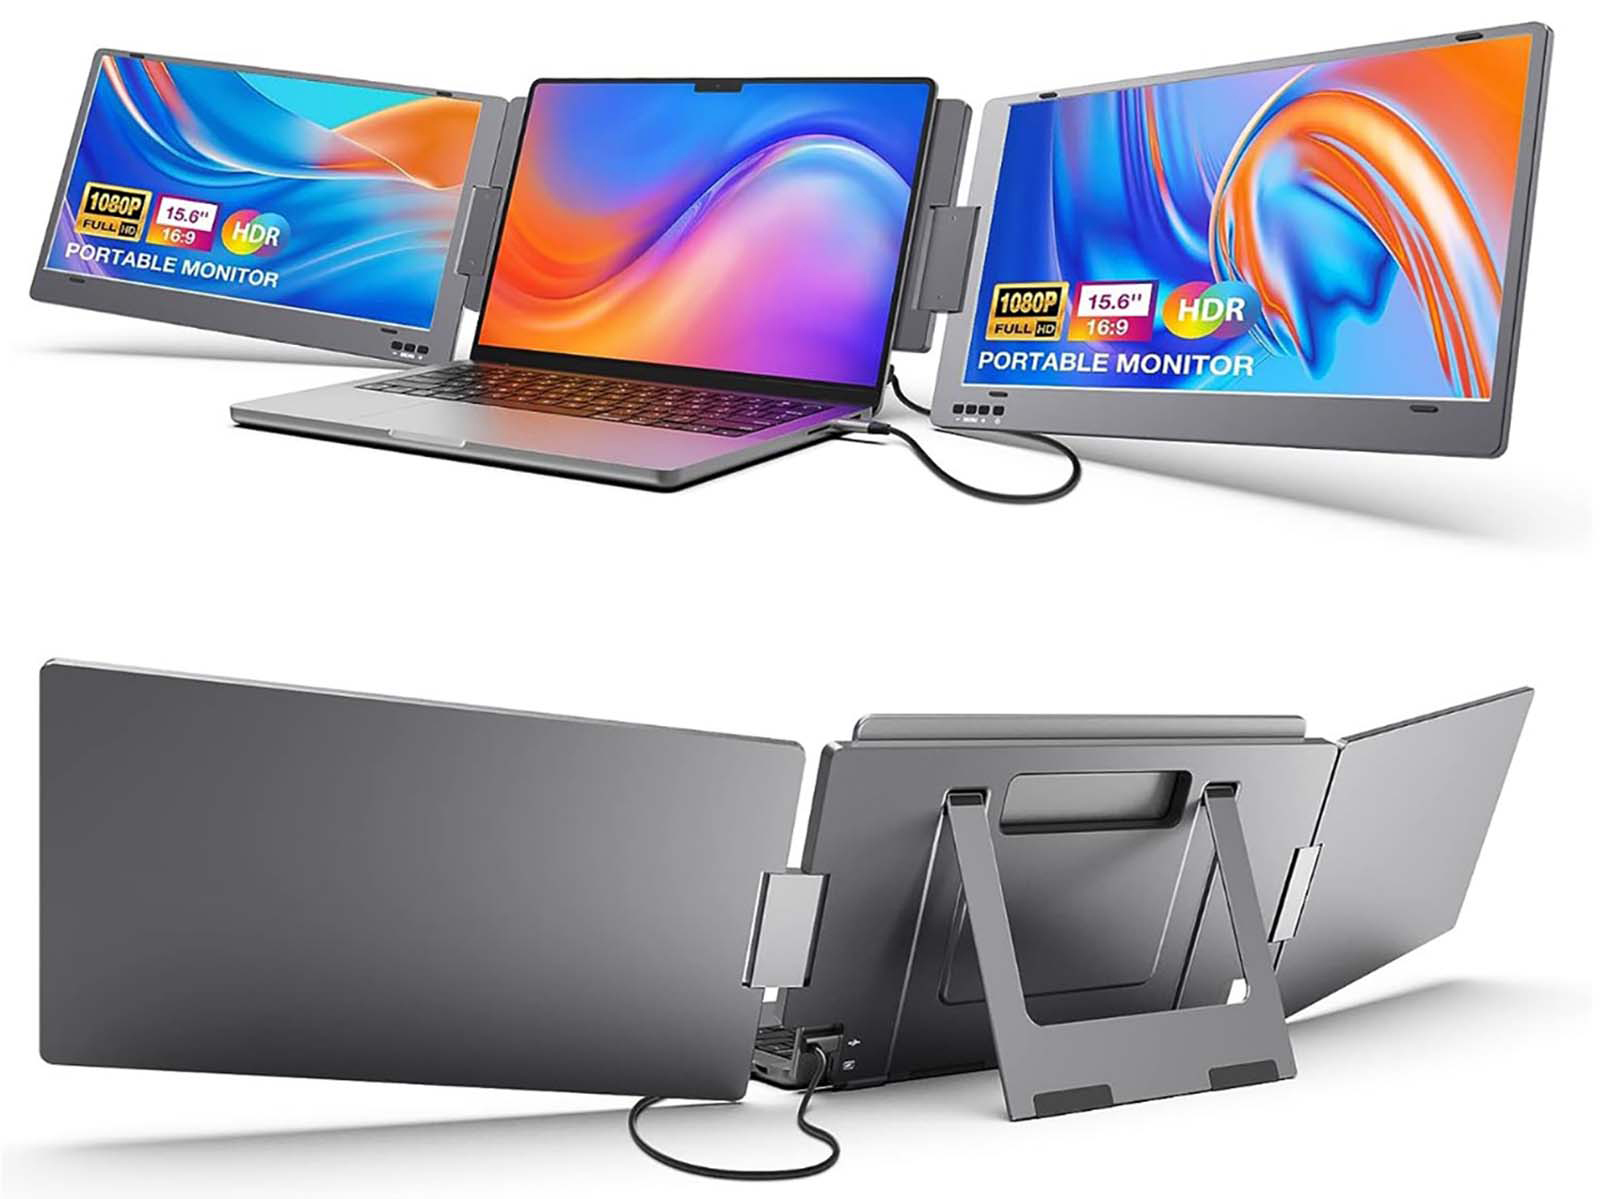 KYY X90A dual monitor review: The portable desktop expansion for